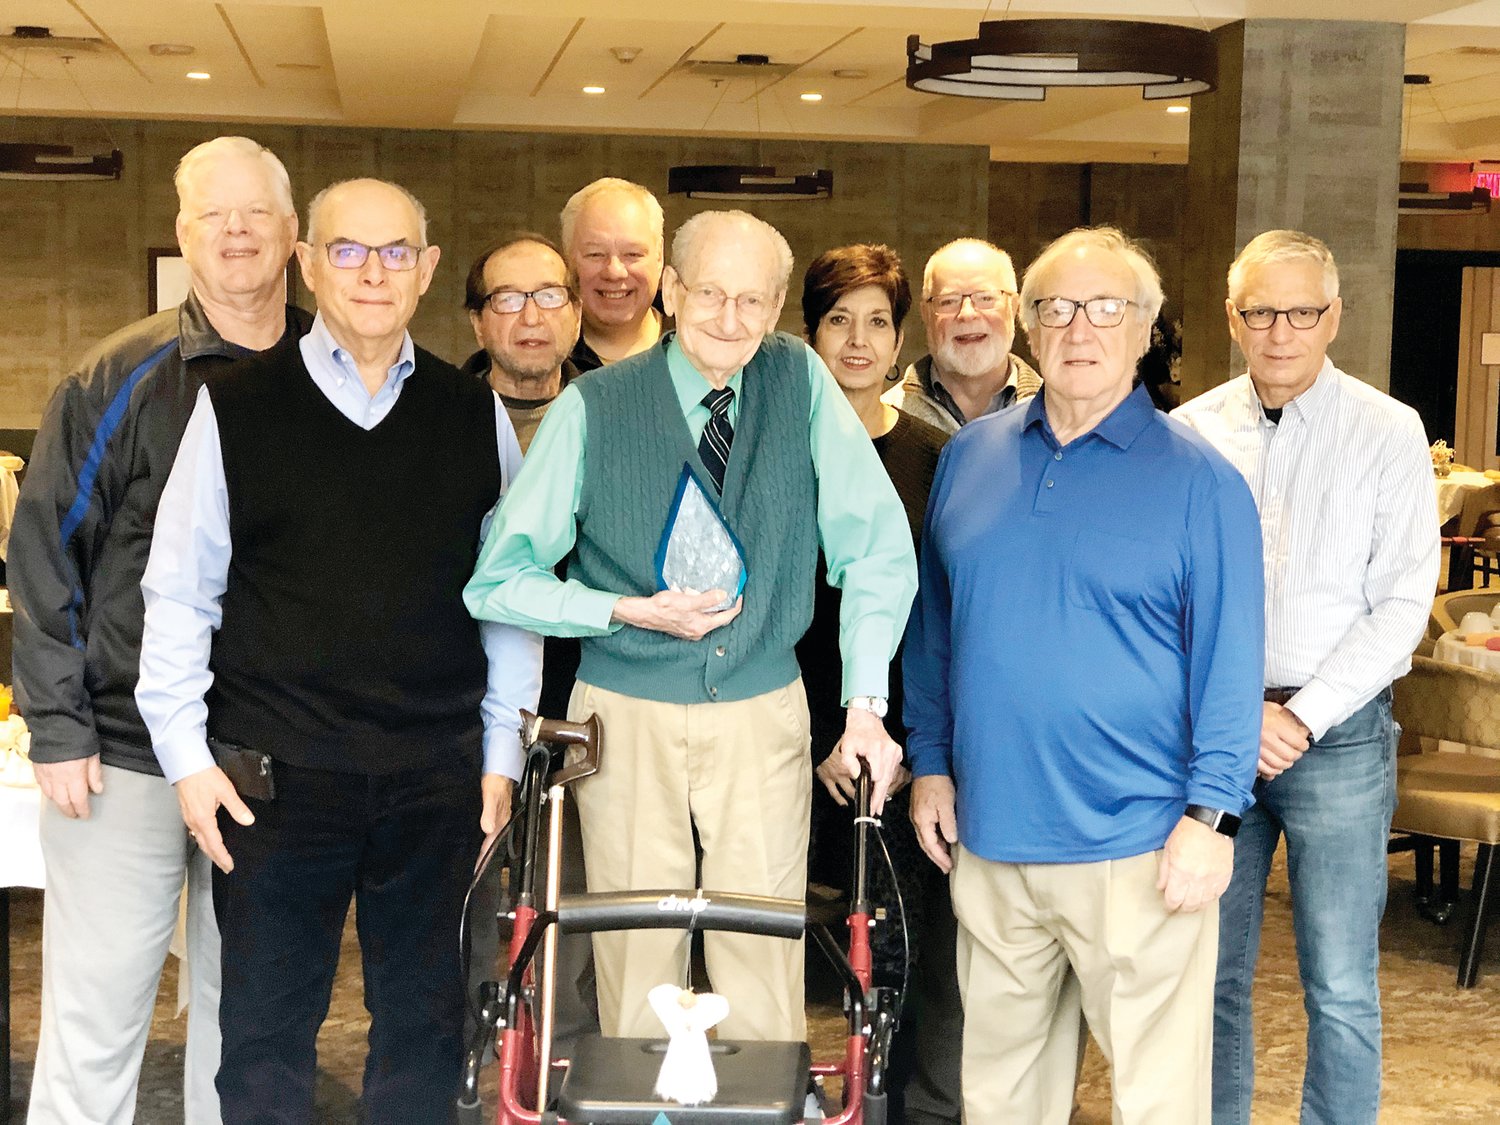 Score Bucks County executive committee, from left, Erwin Michelfelder, Richard Kroger, Alberto Casadei, Charlie Morris, Linda Zangrilli, Tony Moore, Dave Boster and Kevin O’Connell, present chapter co-founder Wendelin “Bim” Stahl, center, with a commemorative award.